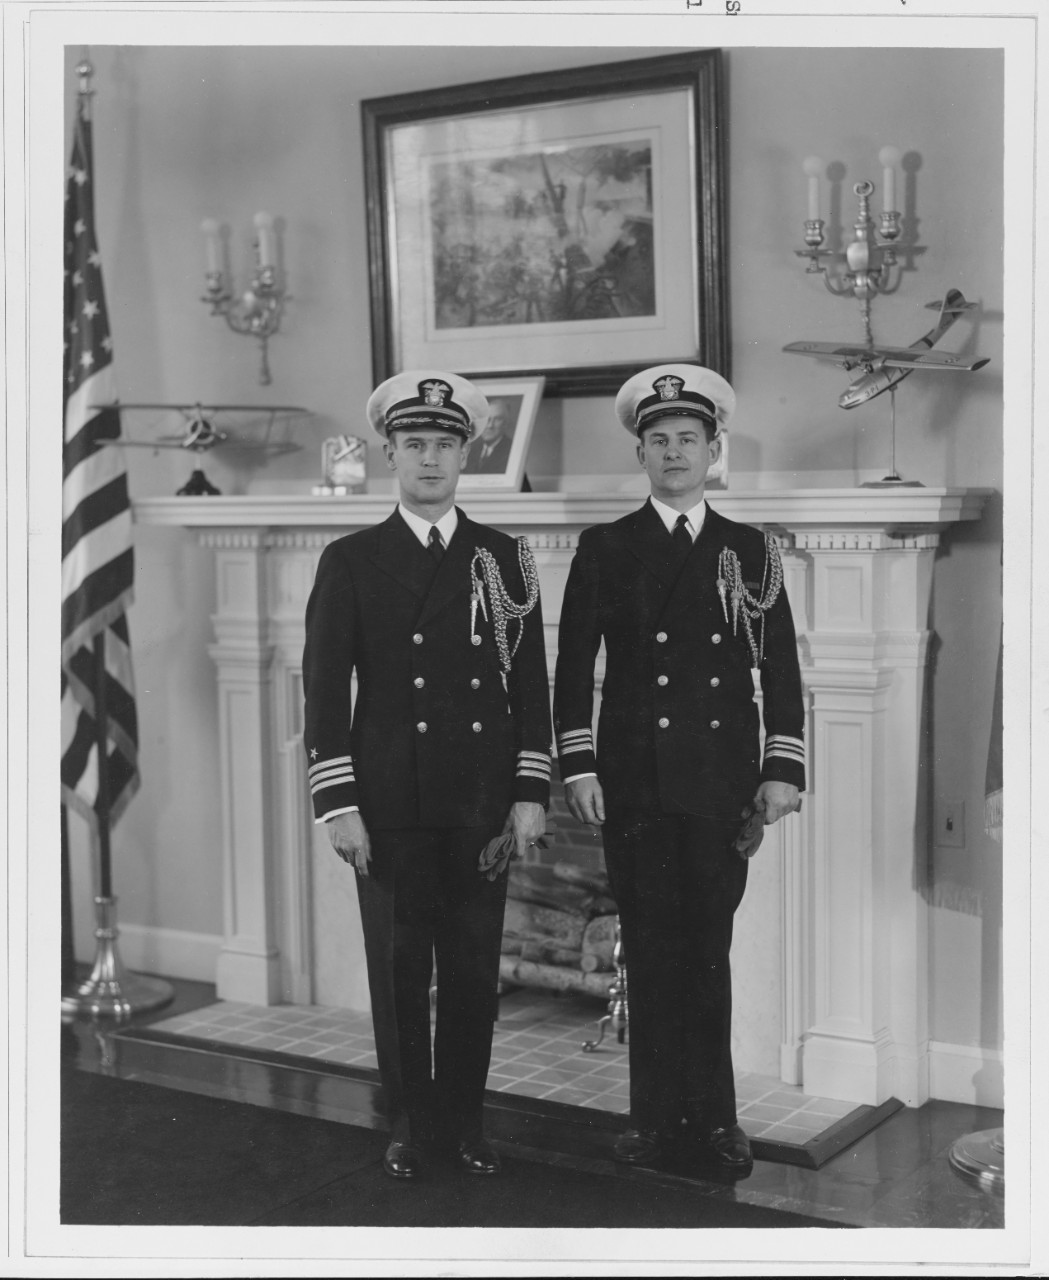 L to R: Comdr. Charles Wellborn, Jr., USN. Lt. Comdr W.R. Smedberg, 3rd, Usn-aides to chief of Naval operations. Jan 1941